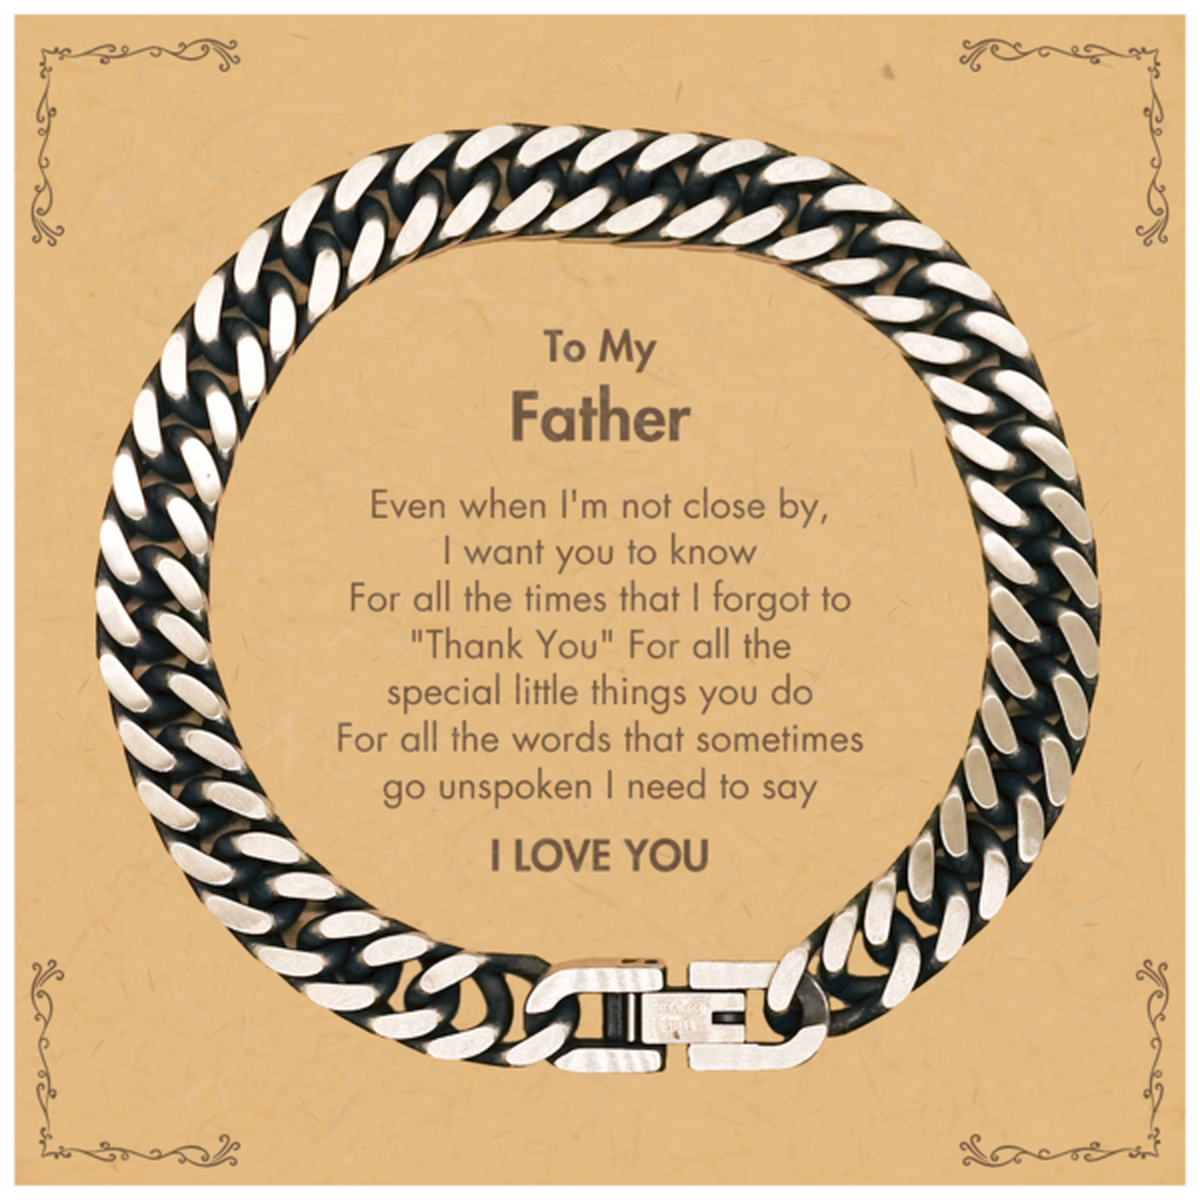 Thank You Gifts for Father, Keepsake Cuban Link Chain Bracelet Gifts for Father Birthday Mother's day Father's Day Father For all the words That sometimes go unspoken I need to say I LOVE YOU